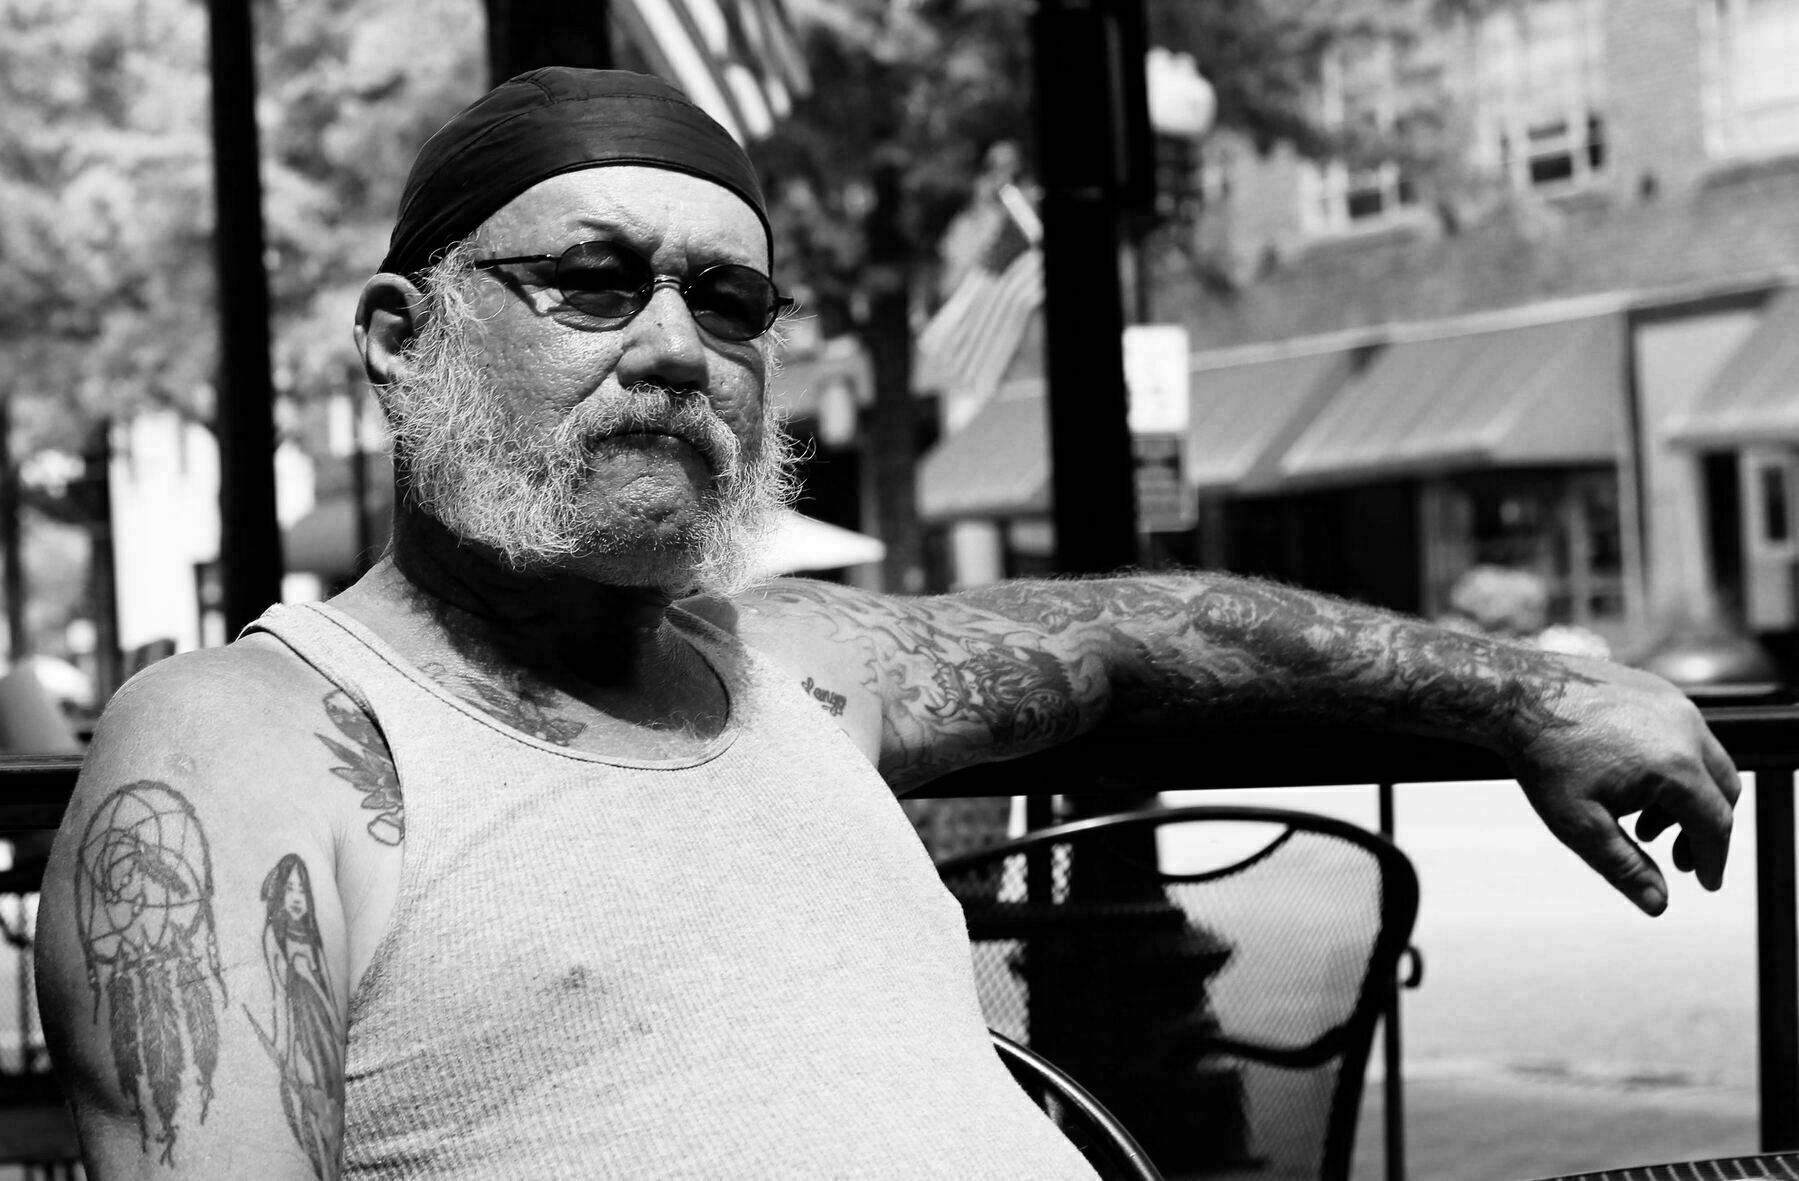 Man with tattoos sits outdoors, wearing a tank top and bandana, arm resting on chair, in a shaded area of a street with storefronts and trees.